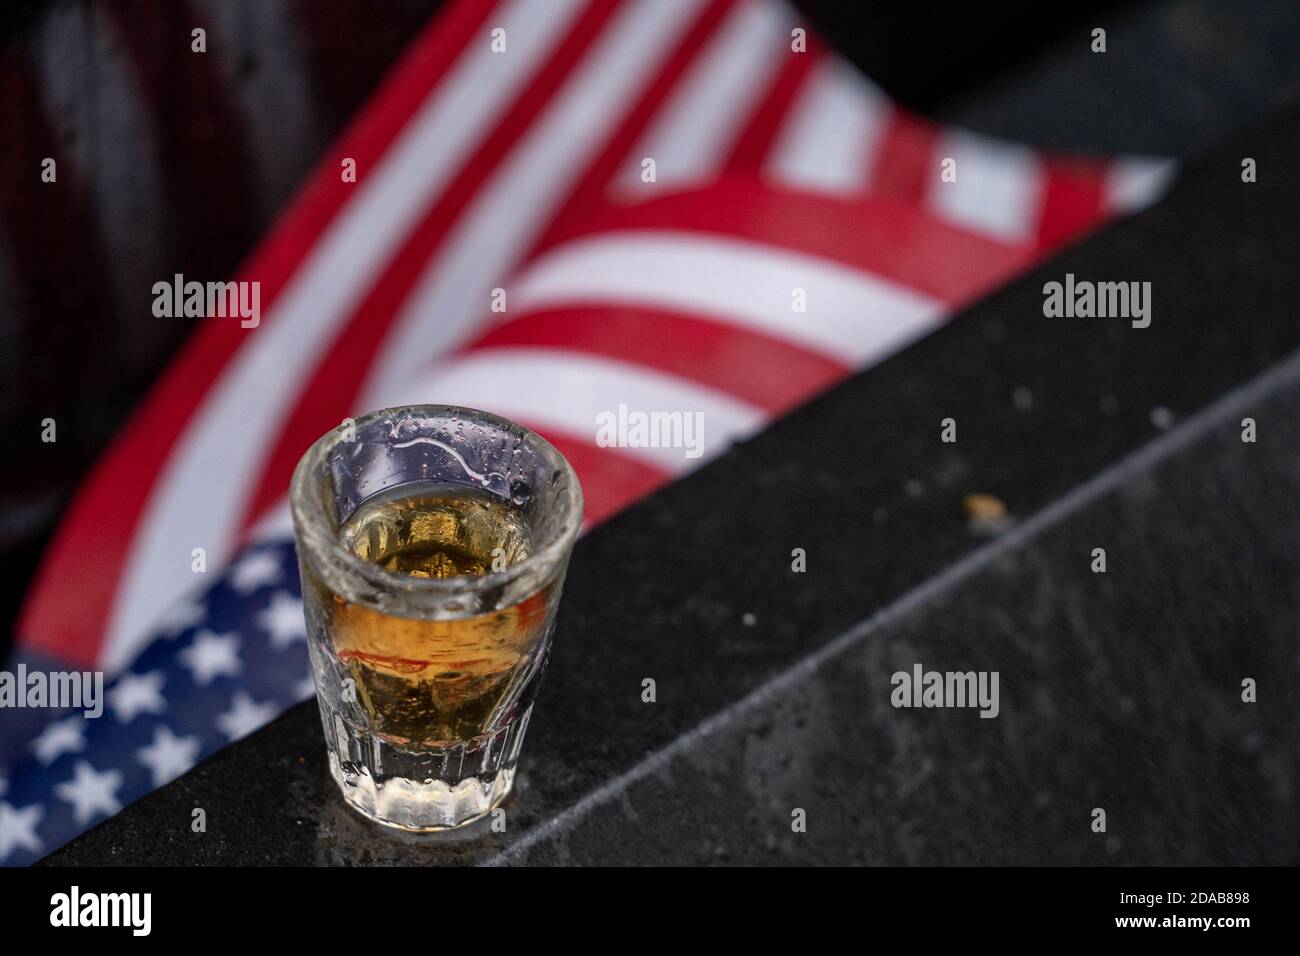 Washington, United States. 11th Nov, 2020. A shot glass filled with Jack Daniels is left at the site of Staff Sergeant Barney Barnhart by his good friend Jack Cowling, a Marine Corp veteran, HMM 364, at the Vietnam Memorial on Veterans Day in Washington, DC on Wednesday, November 11, 2020. Cowling does a shot of Jack Daniels and leaves another shot for his friend at the site every year. Veterans Day is a federal holiday in the United States observed annually on November 11, for honoring military veterans who have served in the United States Armed Forces. Photo by Ken Cedeno/UPI Stock Photo